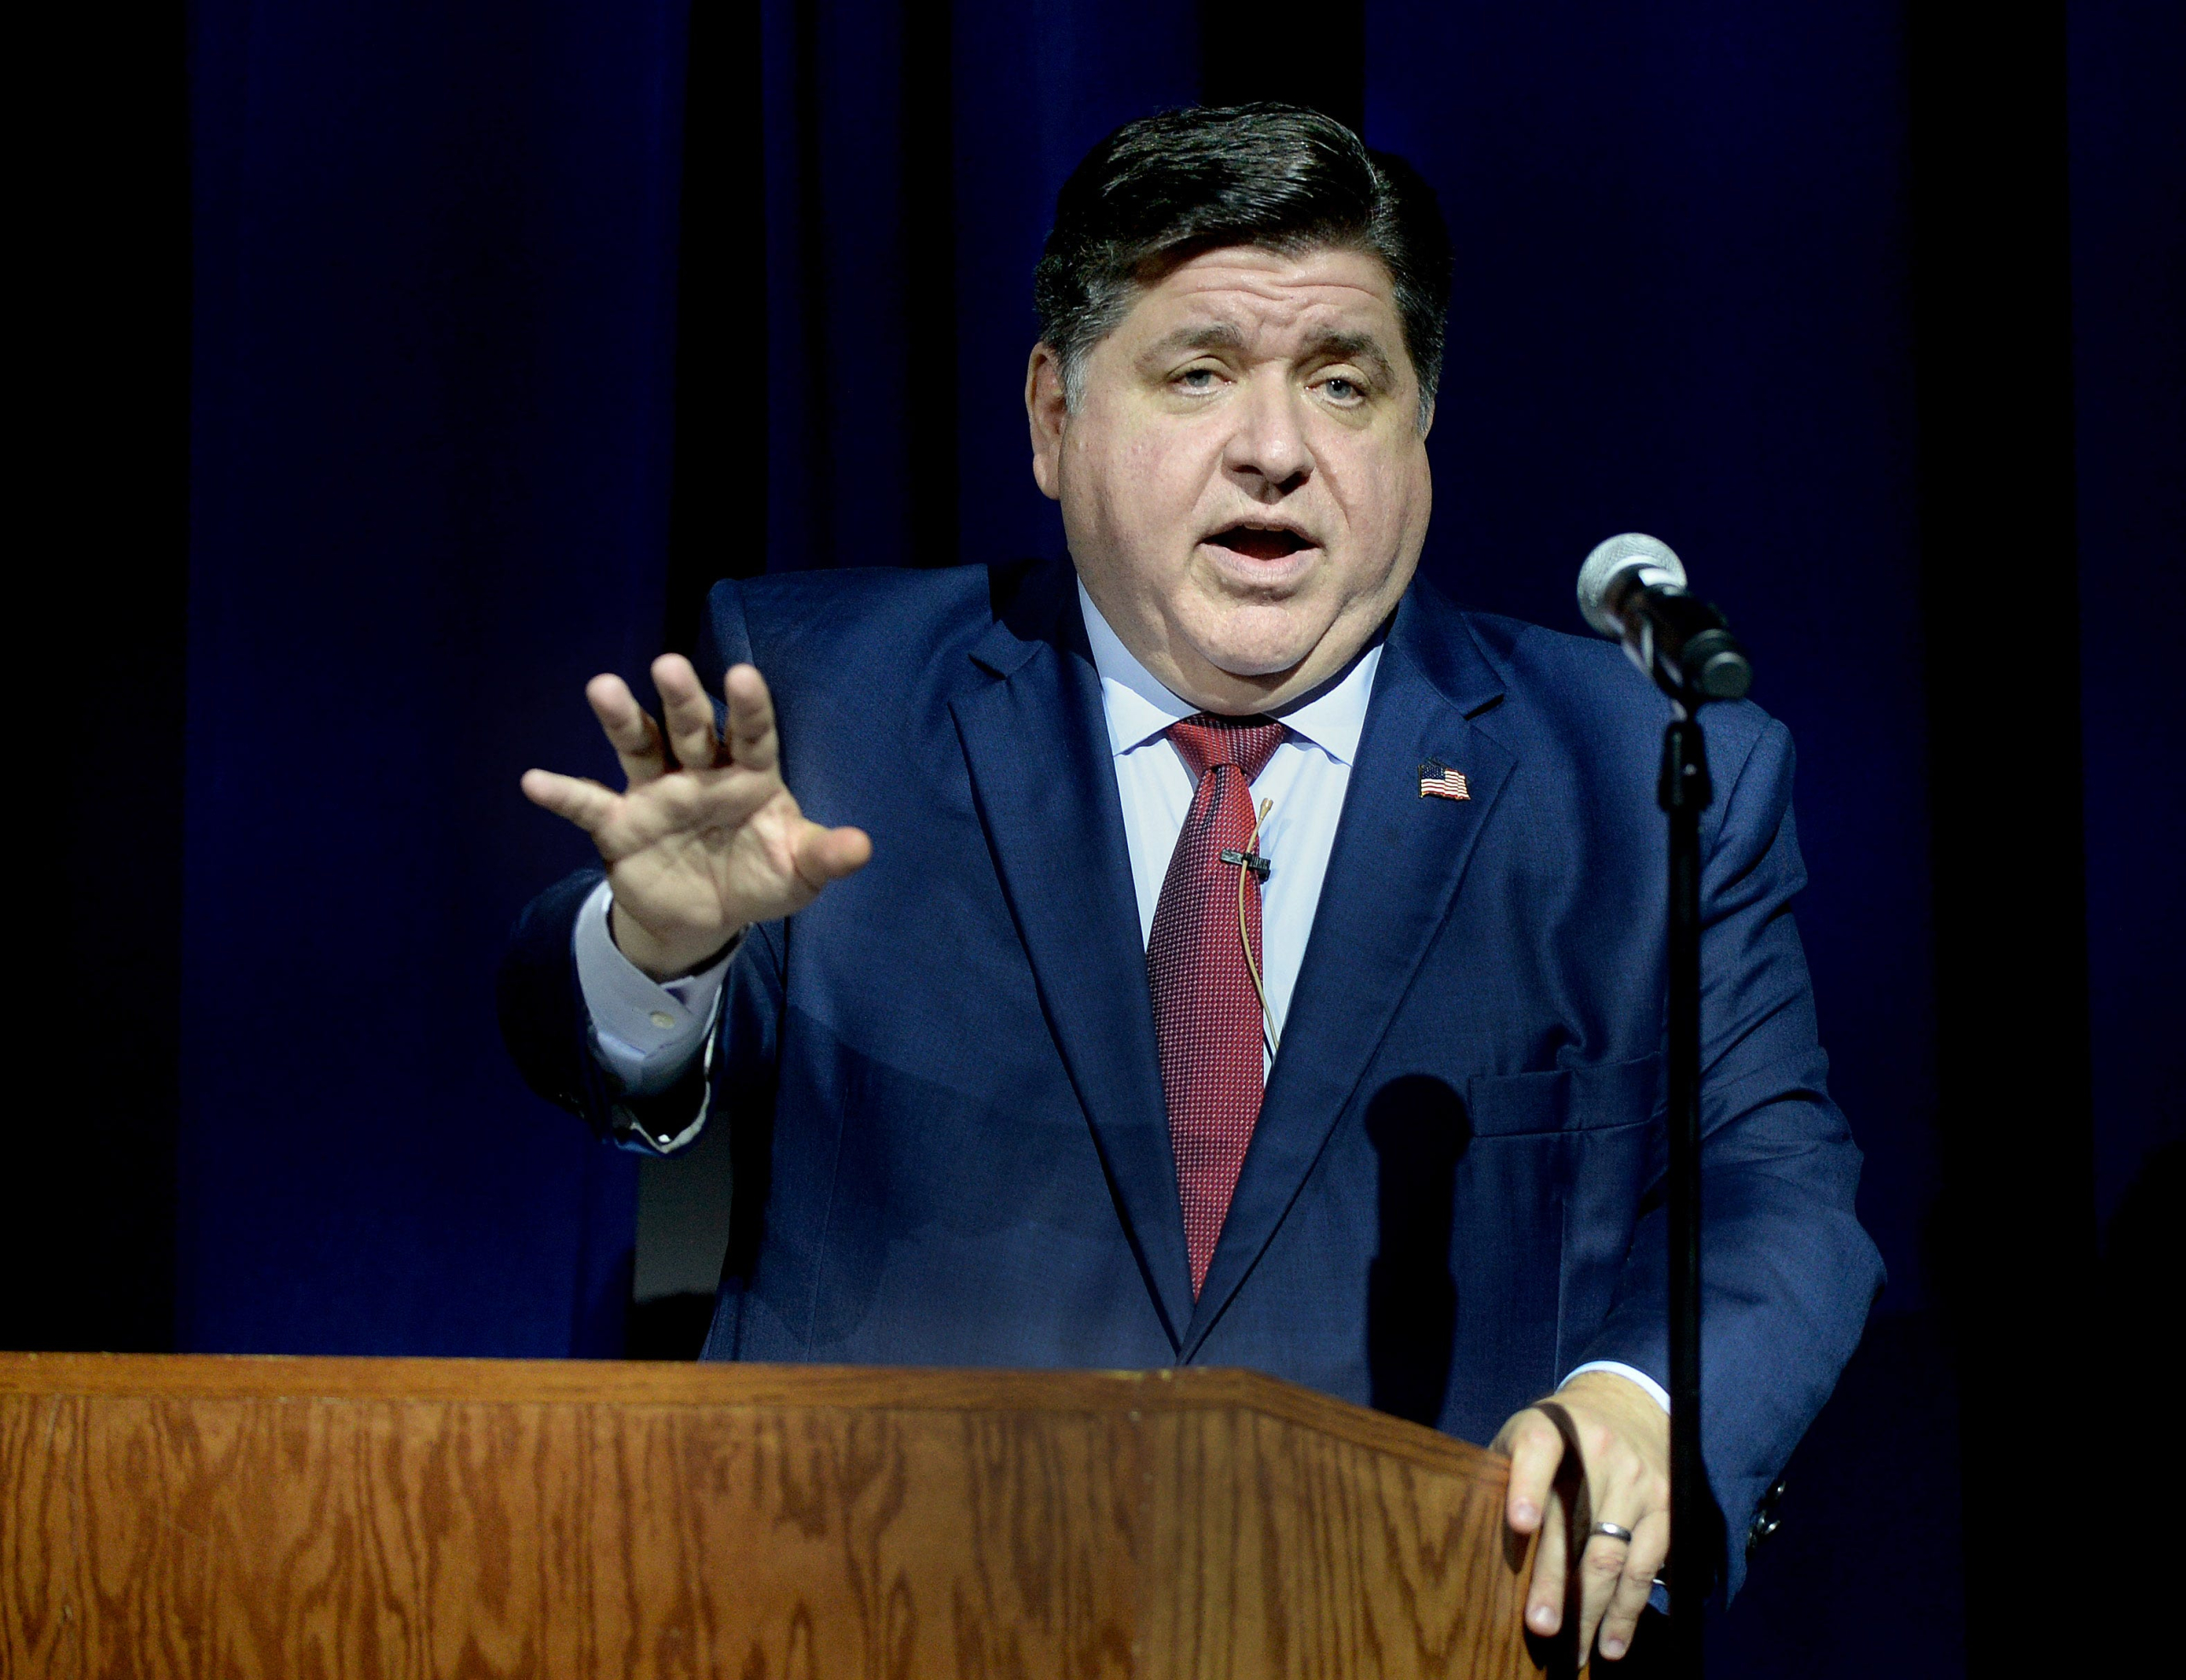 Gotion uses slave labor. What happens to the deal Gov. Pritzker struck with the company?